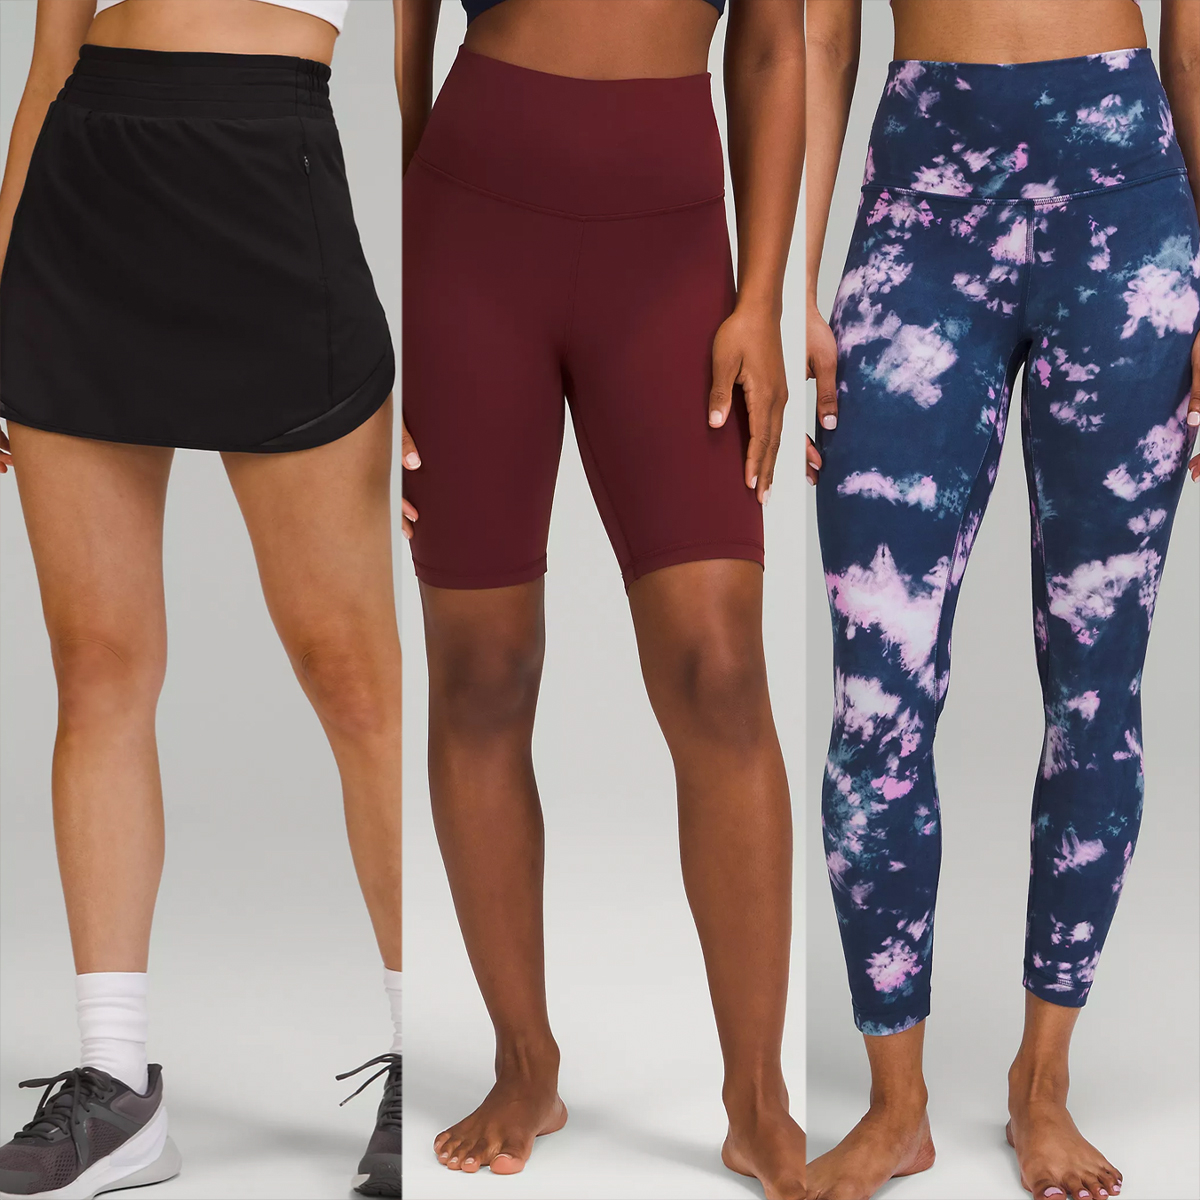 [2,4,6] Energy Bra, Align Tee, Base Pace Tights, Swift Speed Tights